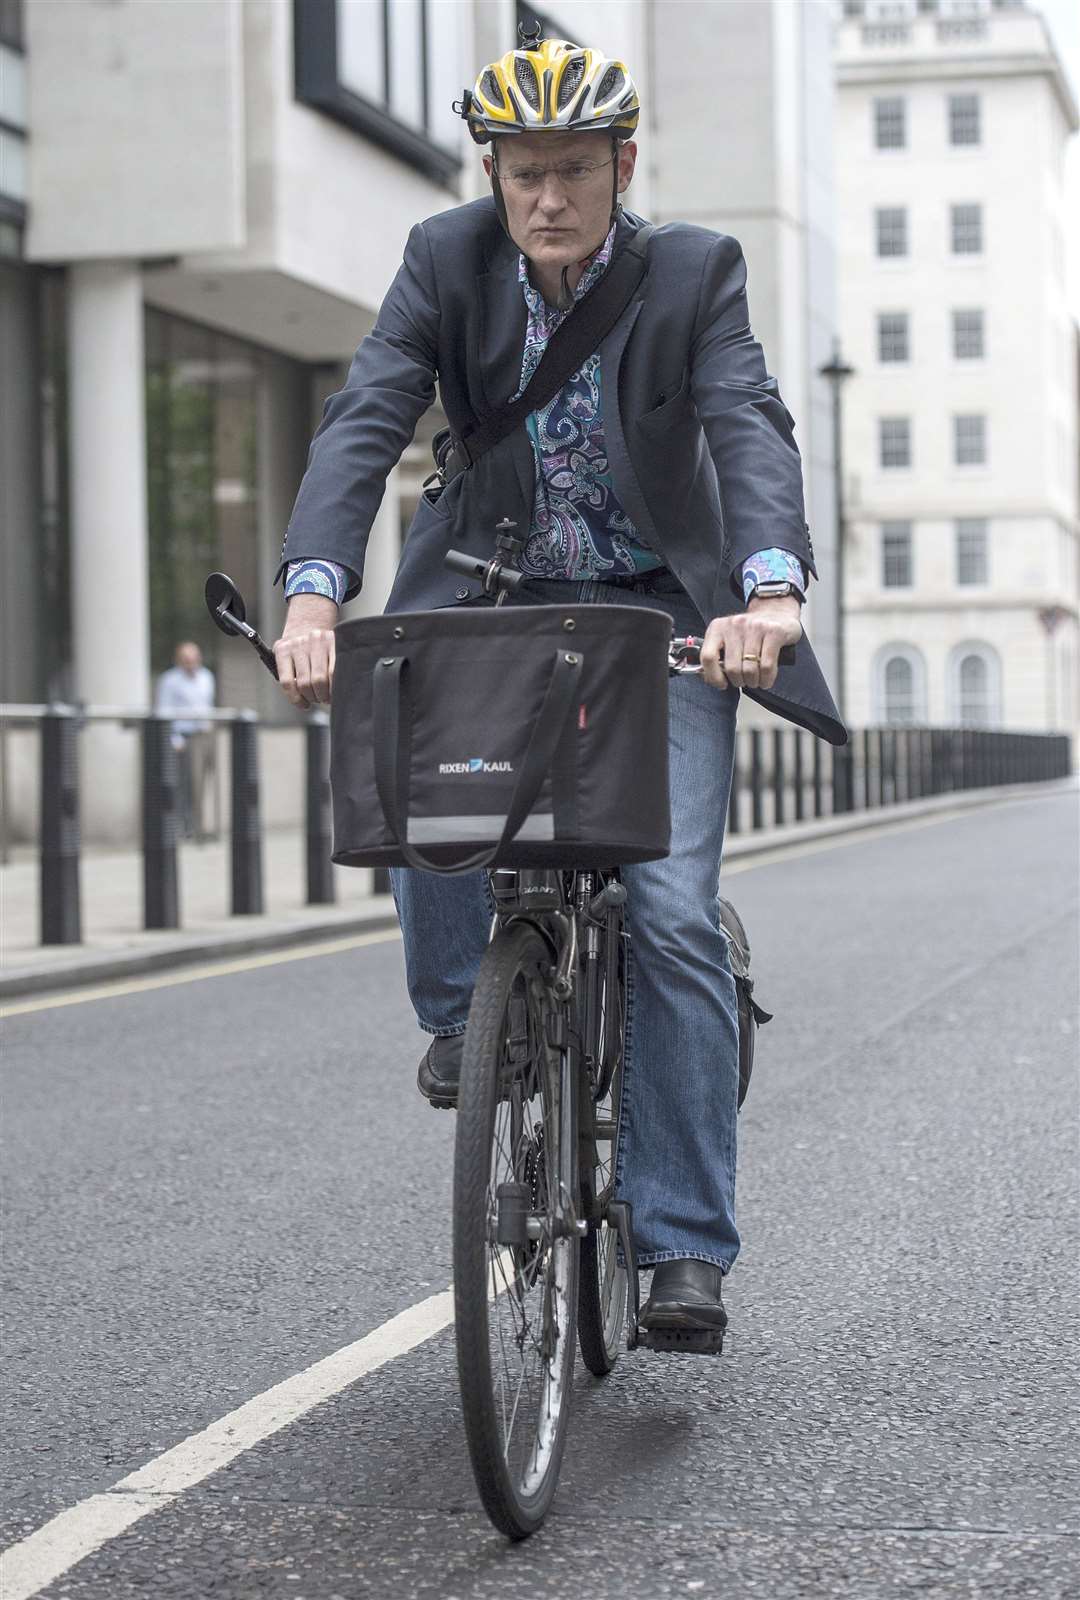 Jeremy Vine shares his passion for cycling and his experiences in the saddle through regular tweets and video clips (Lauren Hurley/PA)